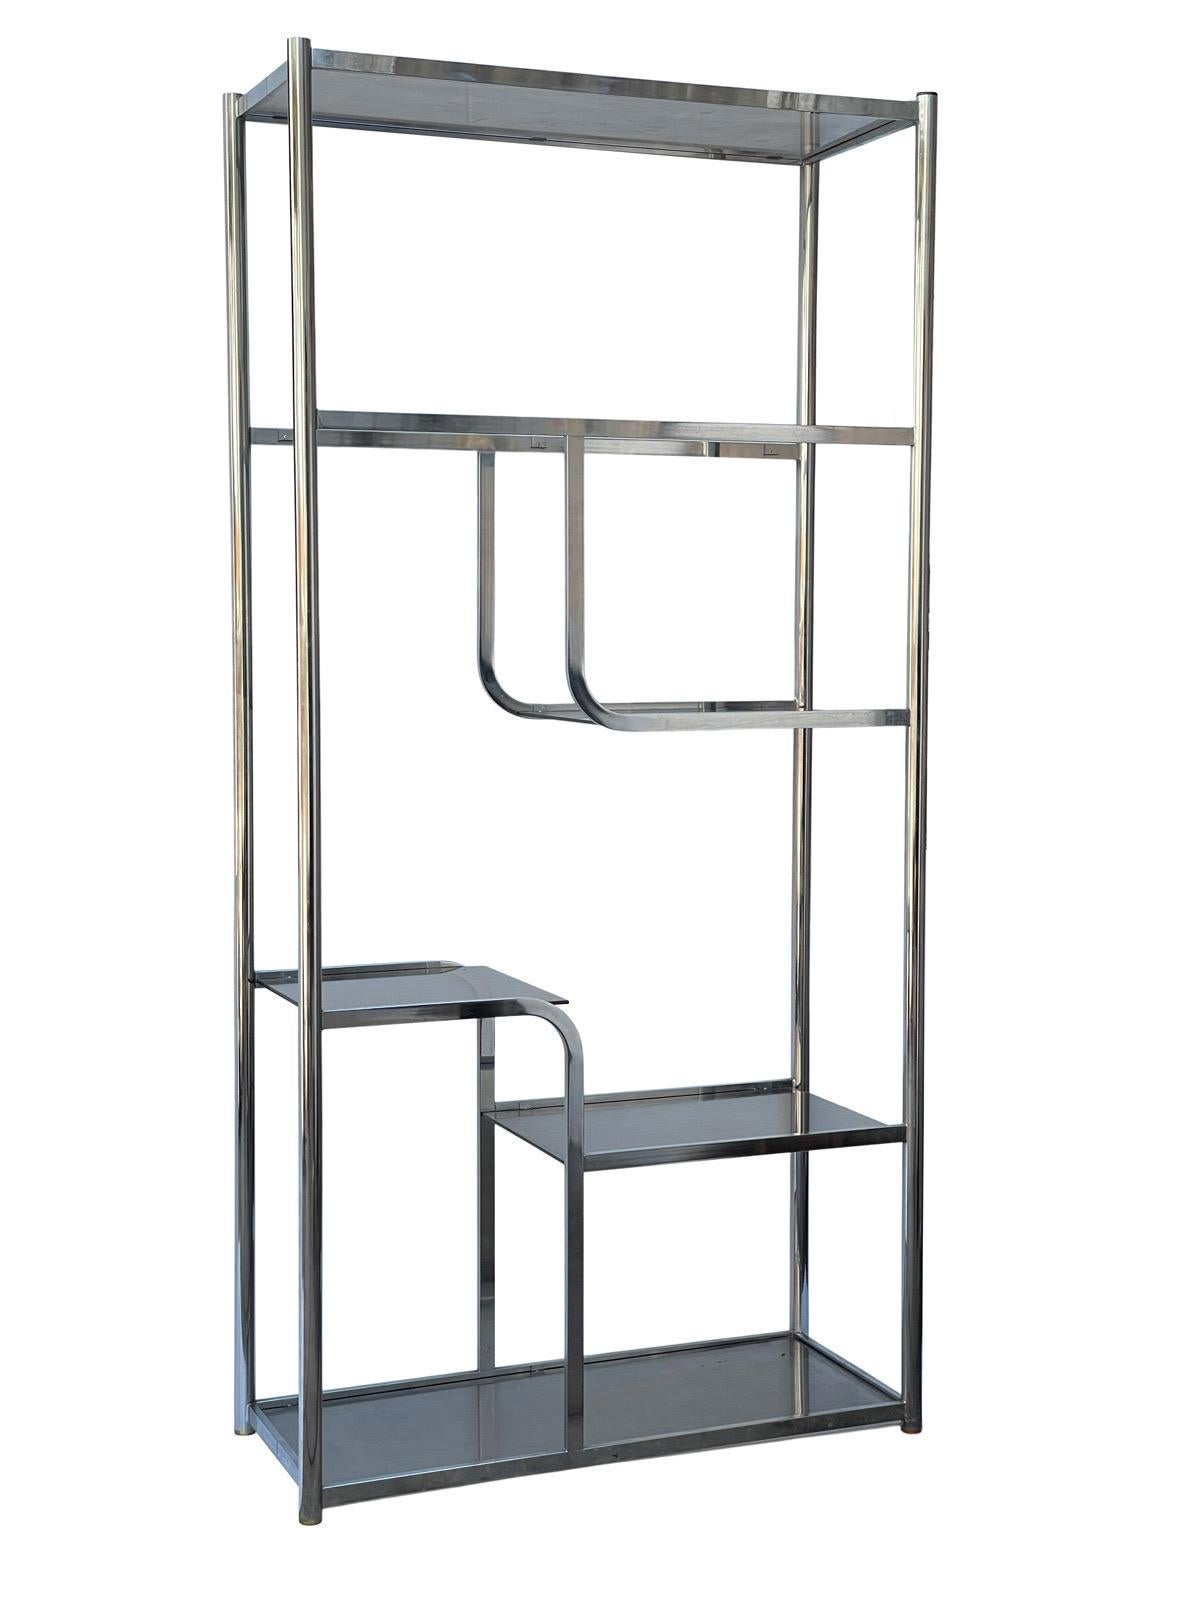 Mid-Century Modern 1970s Geometrical Chrome Shelving Unit in the Manner of Milo Baughman For Sale